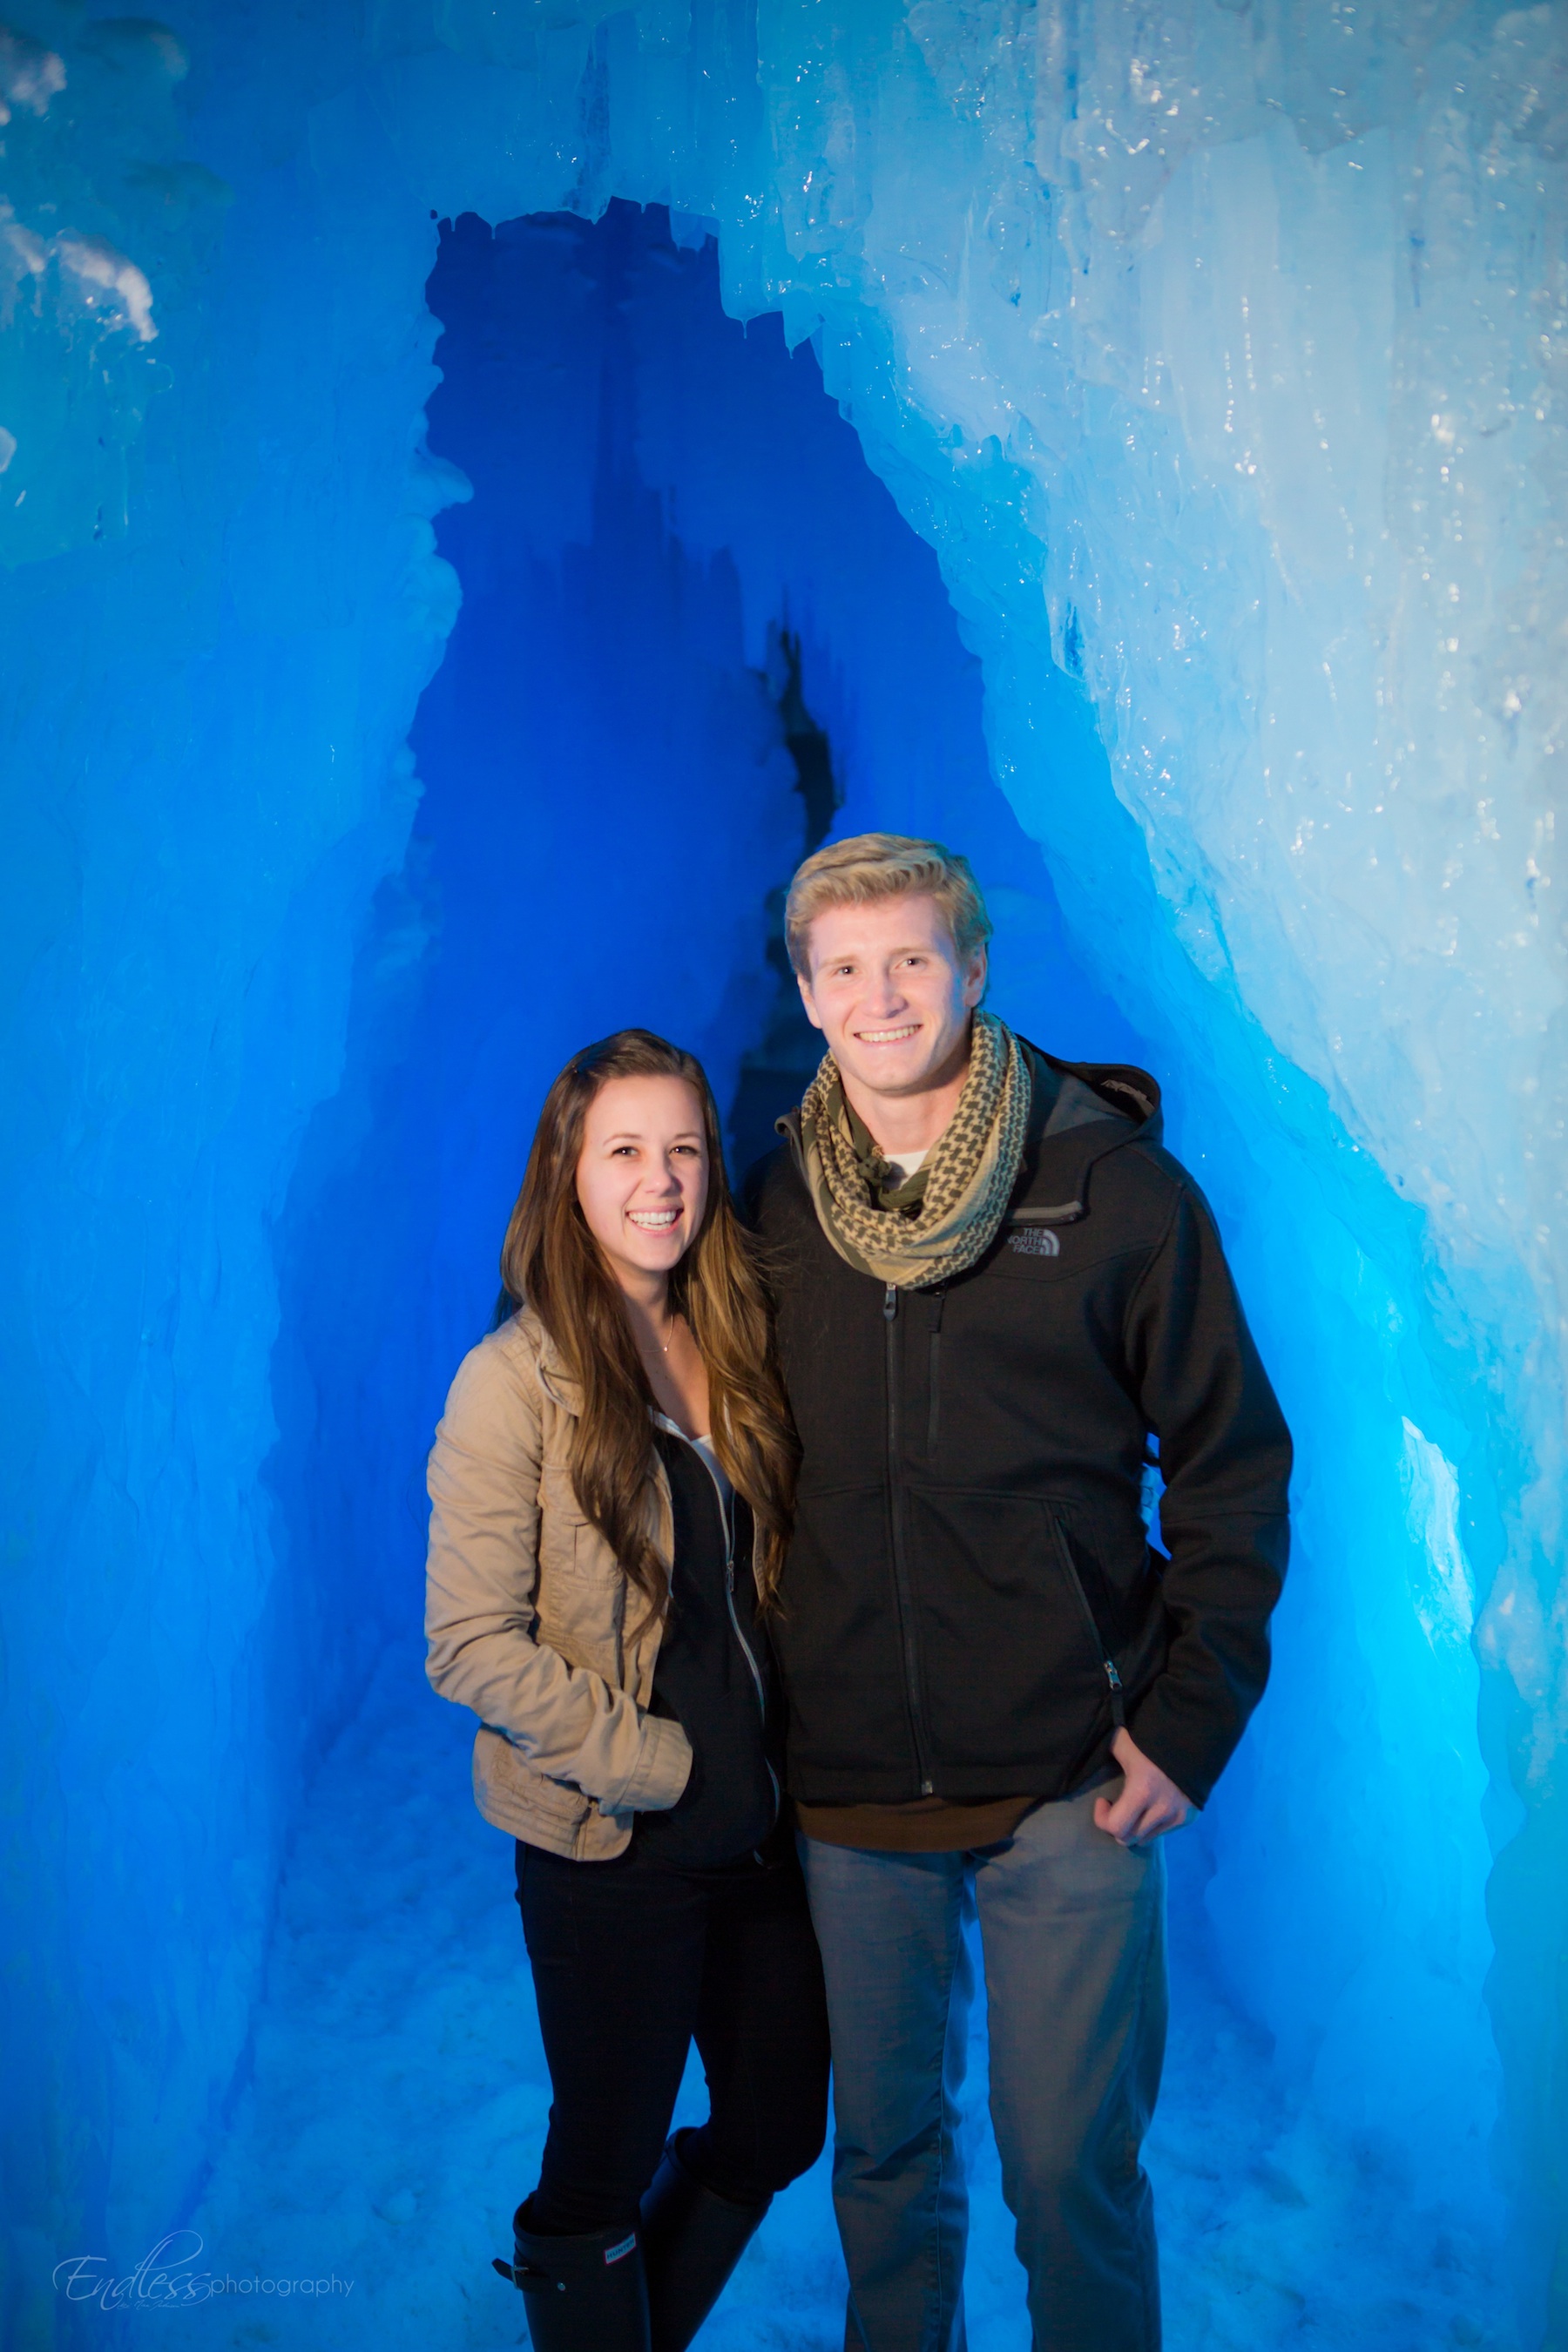 A couple after getting engaged at the Ice Castles.